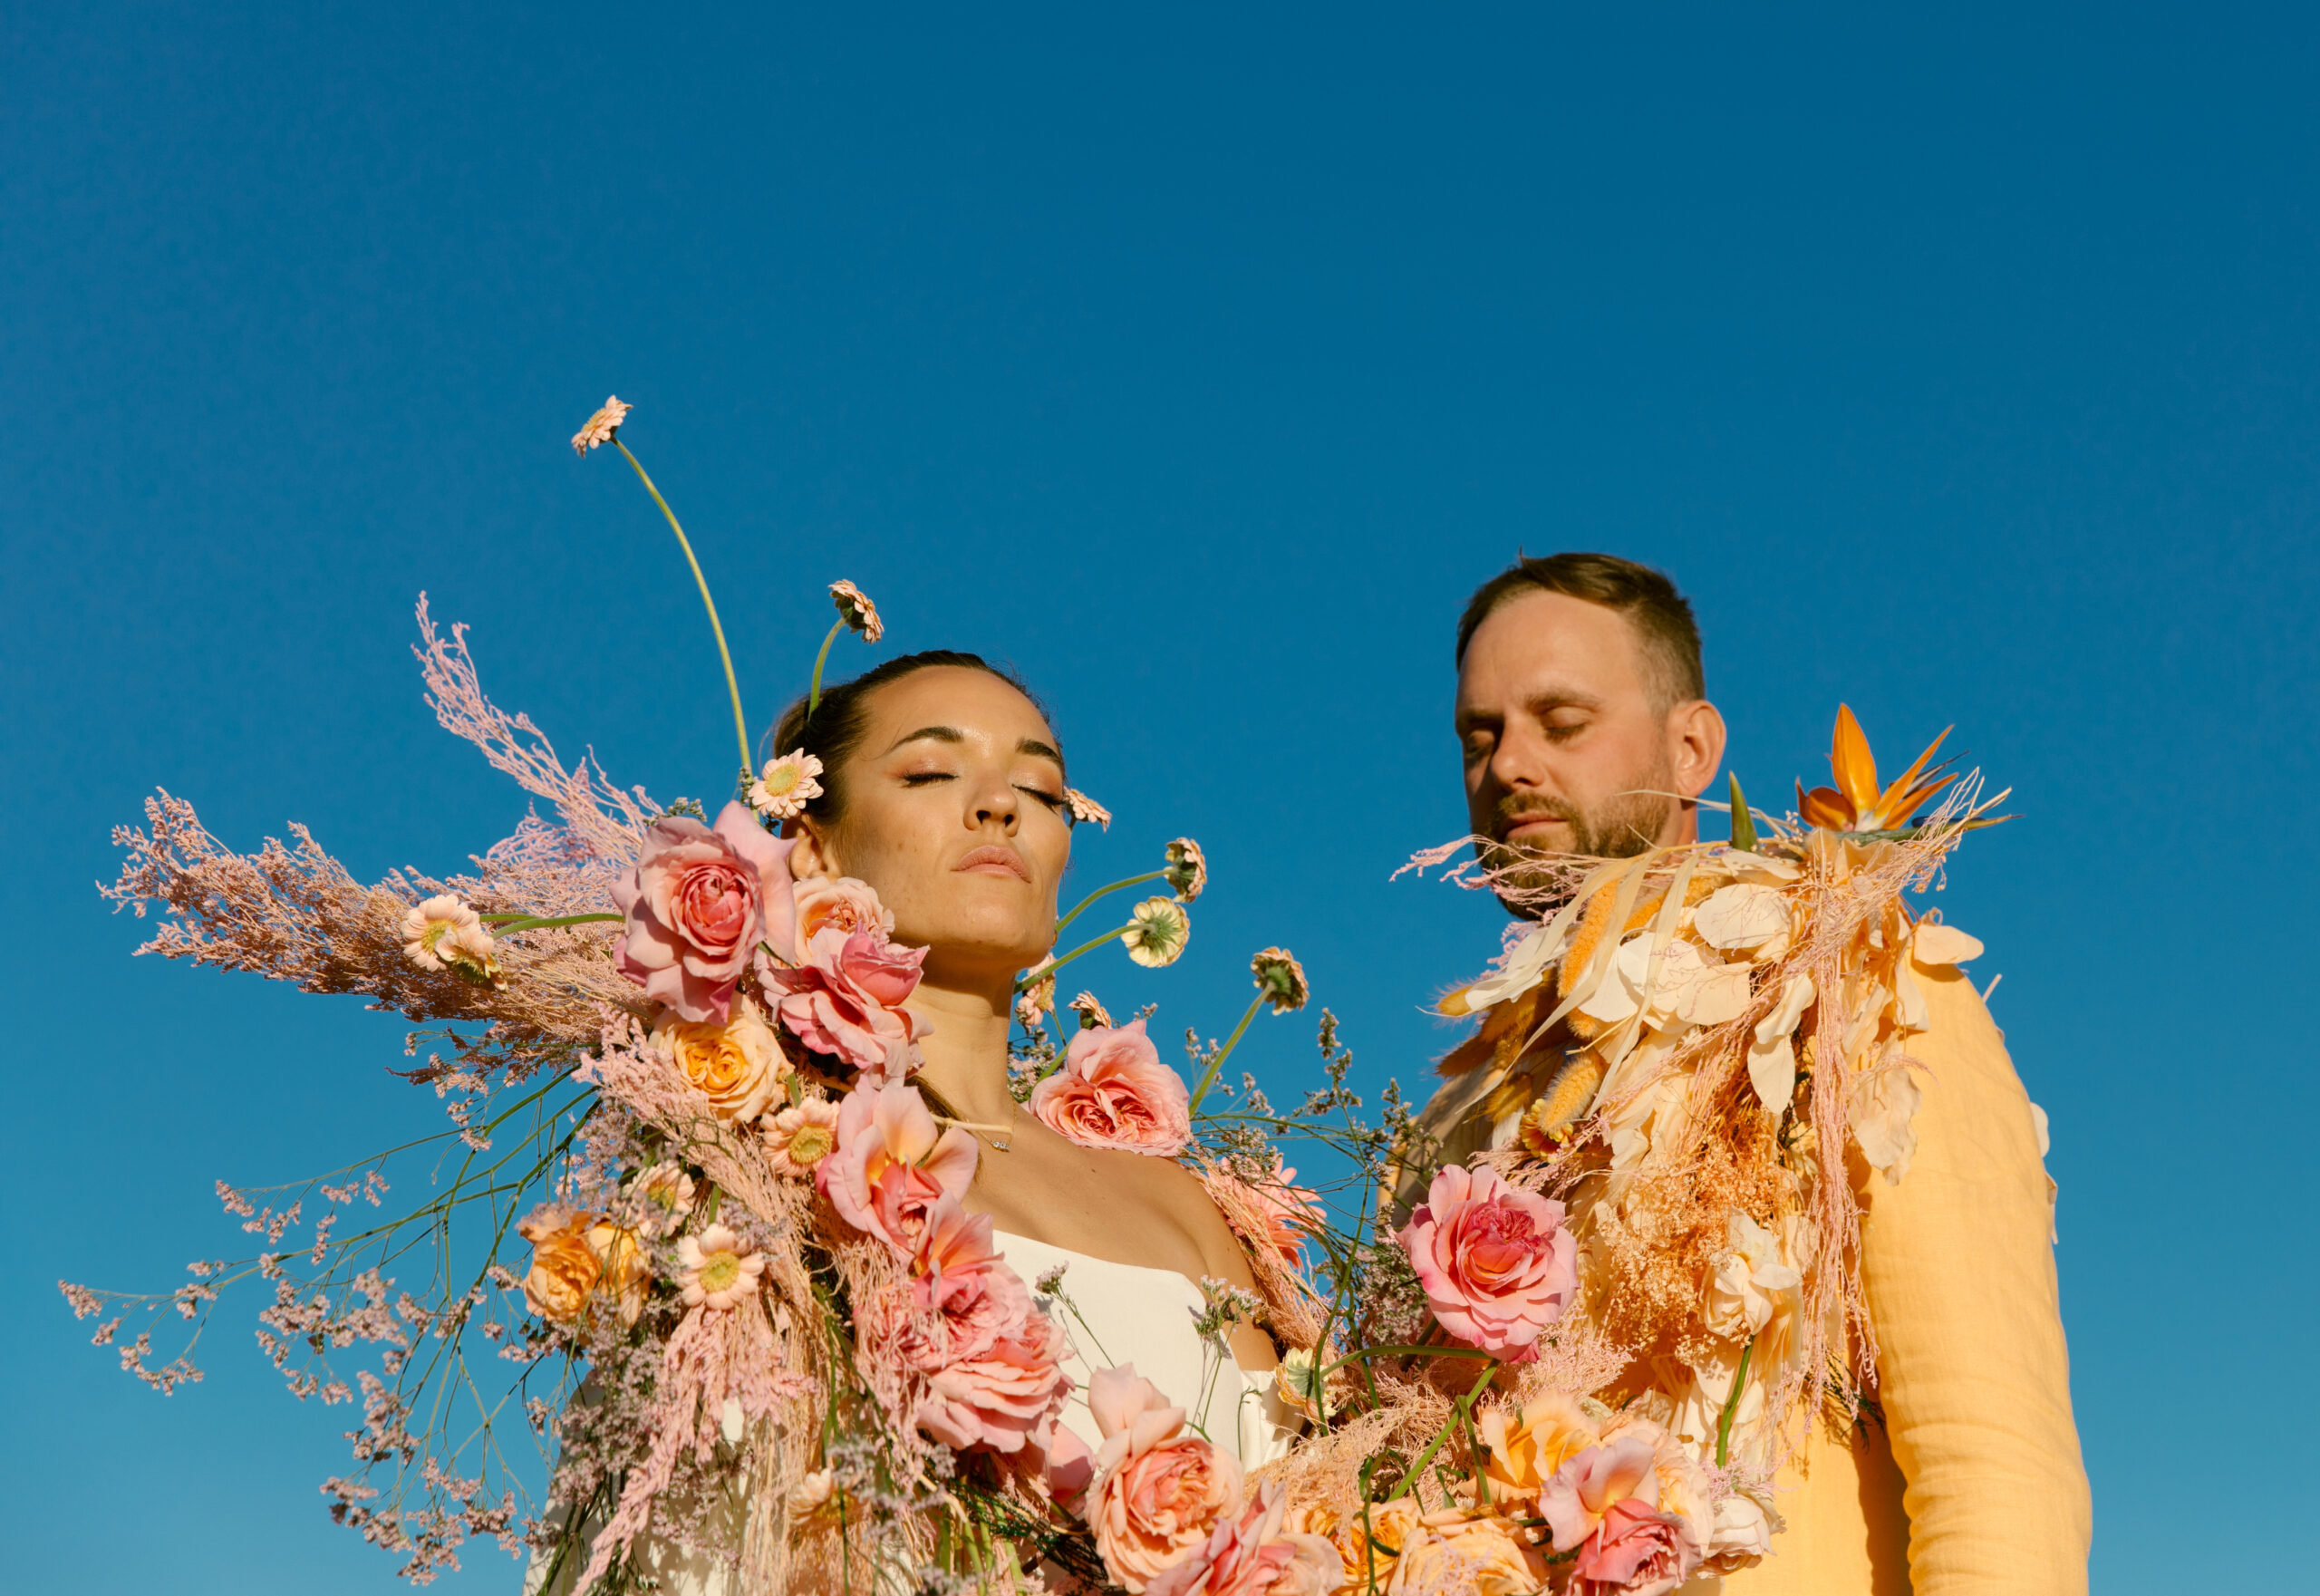 close up vogue inspired wedding portraits. bride and groom wrapped in colorful florals pinks oranges yellows dried florals roses daisies blue skies. light orange linen groom suit
